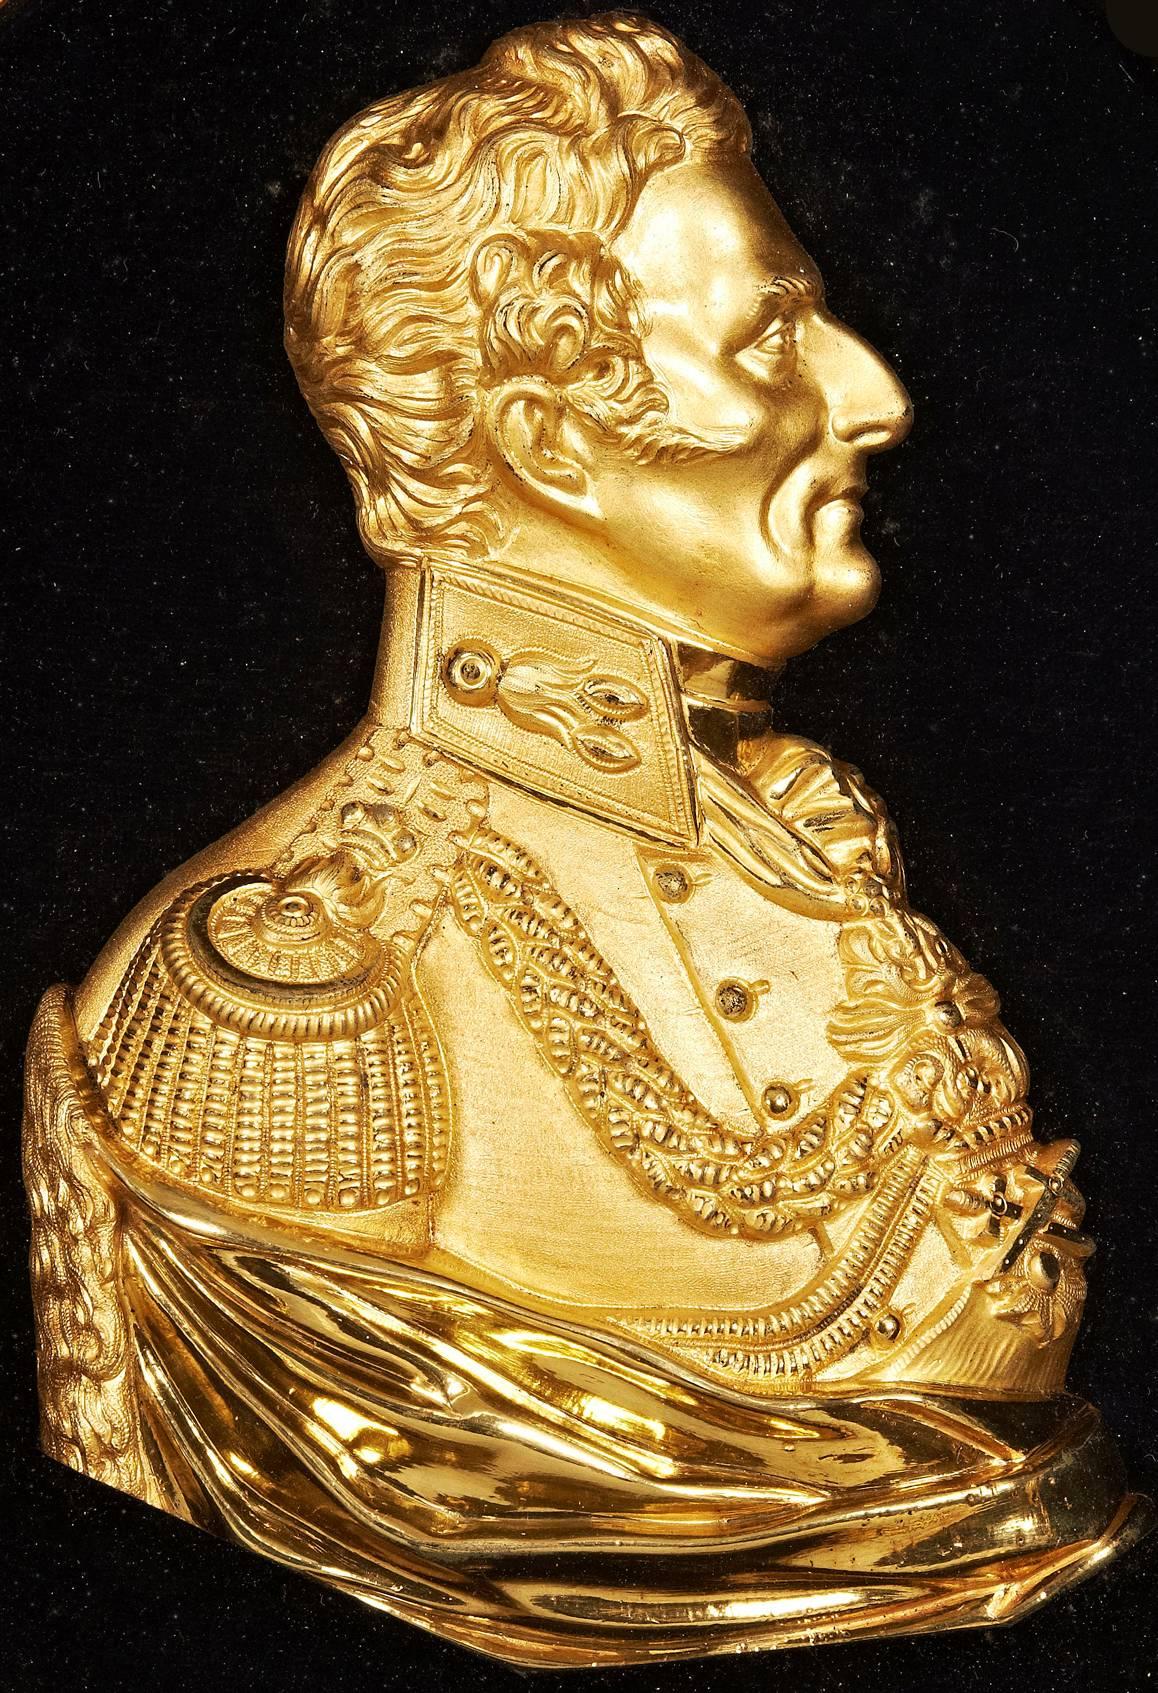 A gilt bronze plaque of The Duke of Wellington in uniform. The plaque is in its original oval gilt, shadow box frame which has prevented the gilt to the bronze tarnishing, leaving it with its high finish. The frame is decorative in itself and